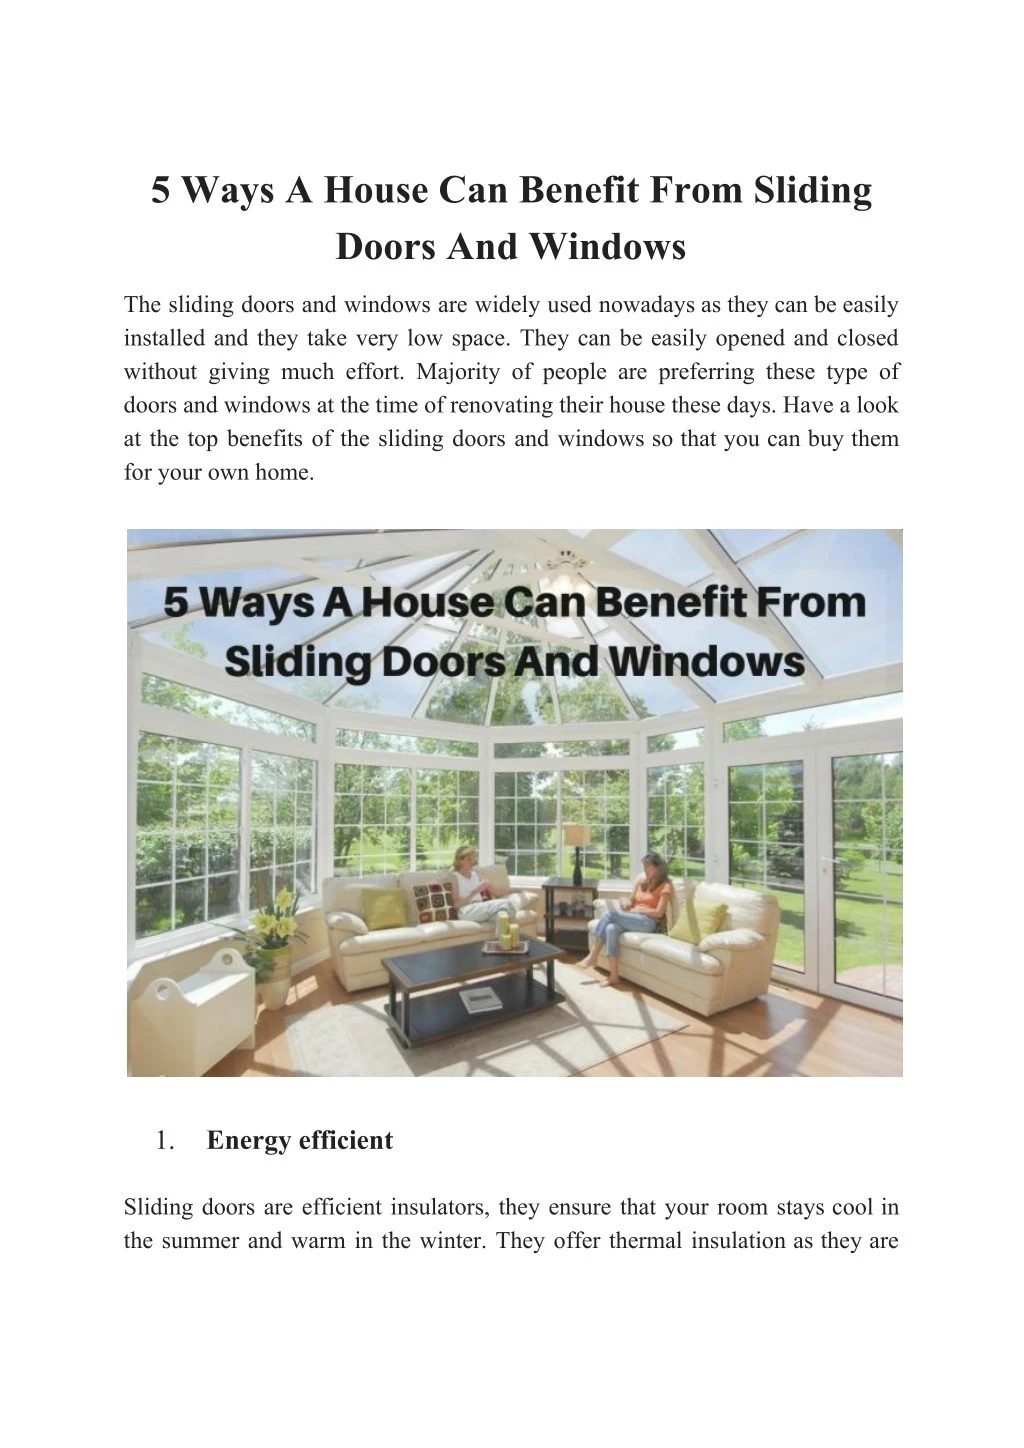 5 ways a house can benefit from sliding doors